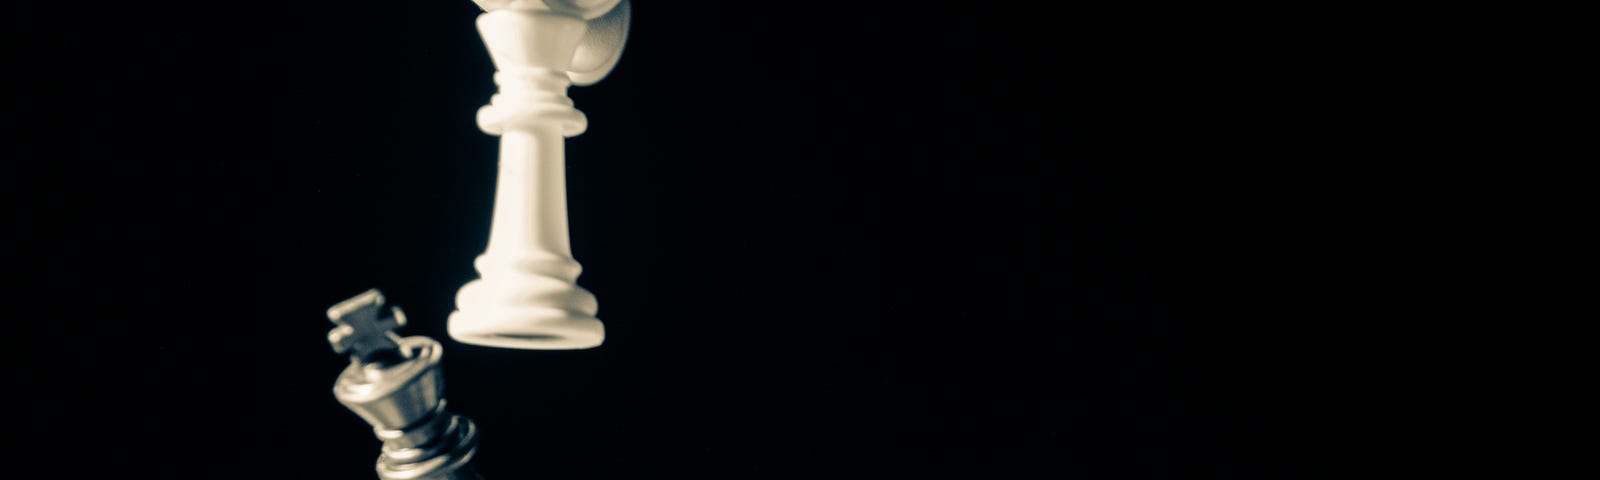 A picture of a person holding a white chess piece and tipping over another black chess piece.